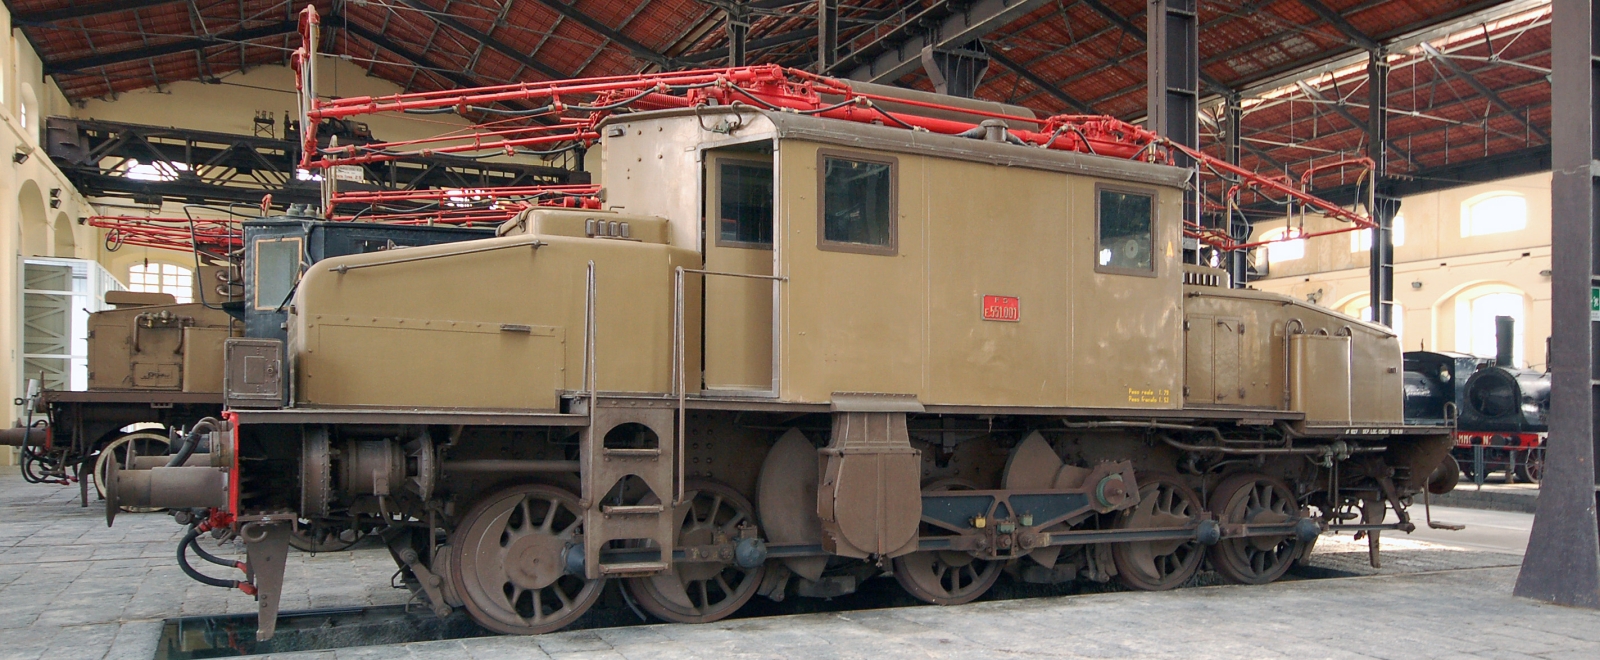 E.551.001 at the National Railway Museum in Pietrarsa